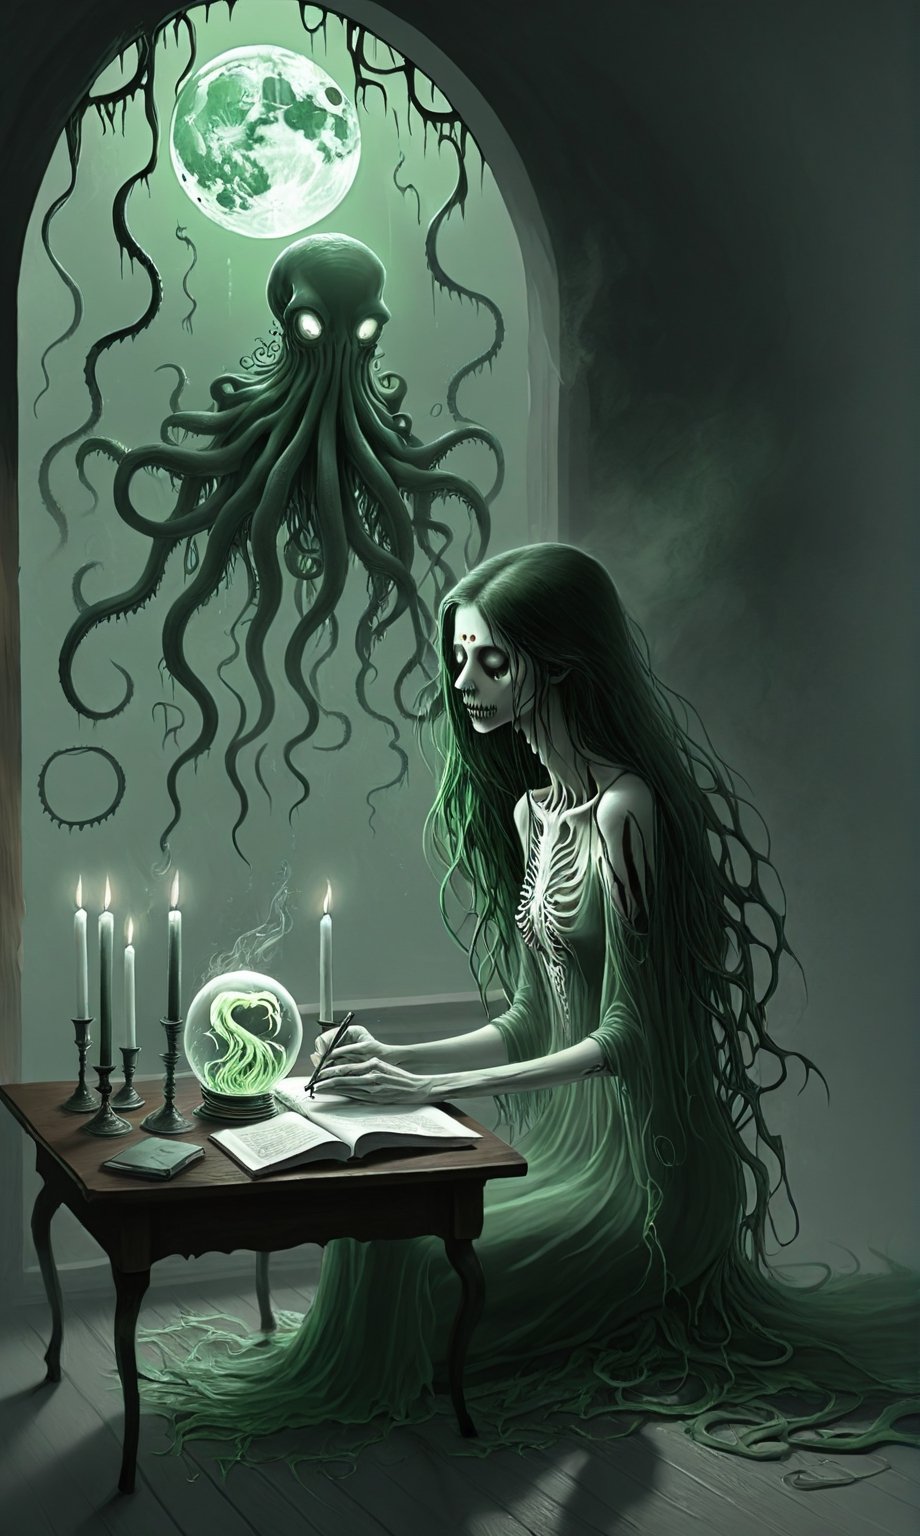 ((A thin wispy sad ghoul girl sitting at a desk)), she is studying book, (((an image of a tentacle monster appears in the crystal ball sitting on the table))),1 tall drippy candle sits on the table,some green skeletal ghosts hover in the background, a thin crescent moon shines through a broken window,(spiderwebs),donmcr33pyn1ghtm4r3xl  